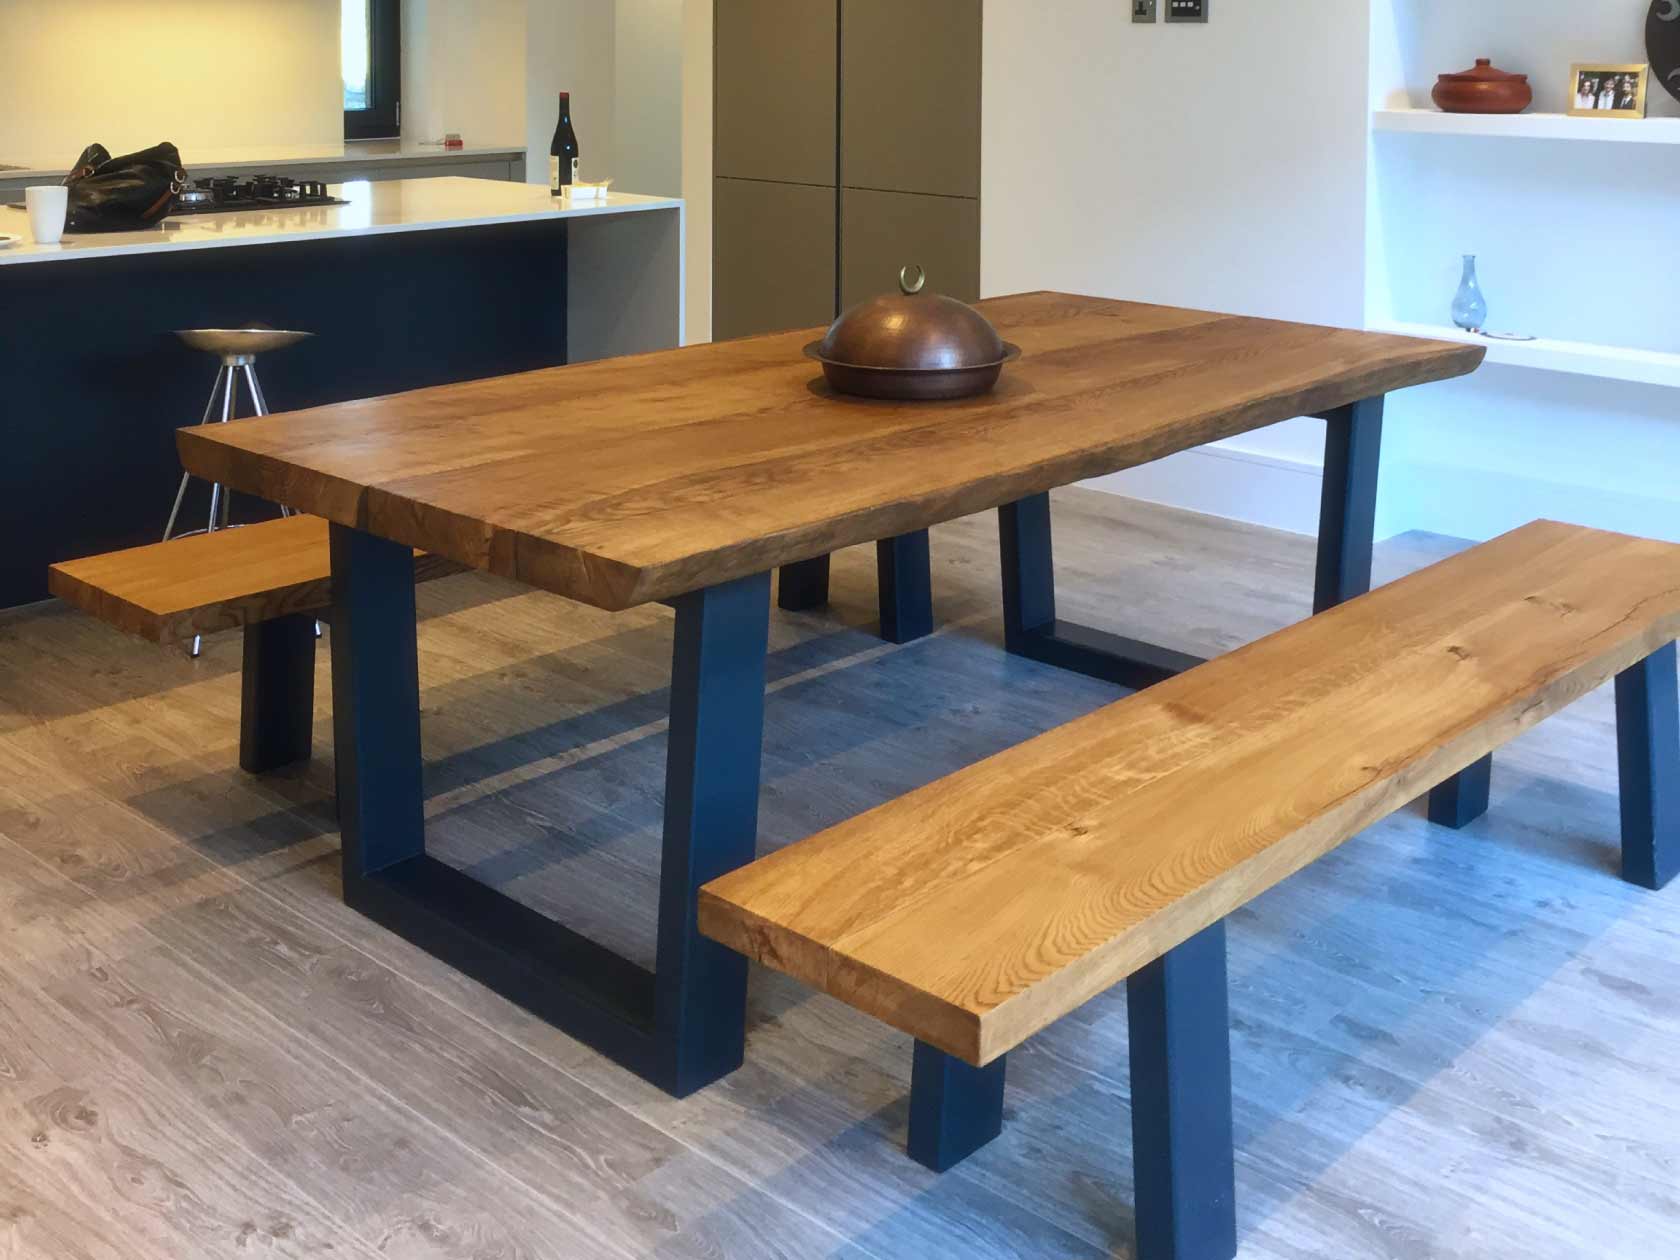 Rustic Dining Table Set with Bench | Abacus Tables
